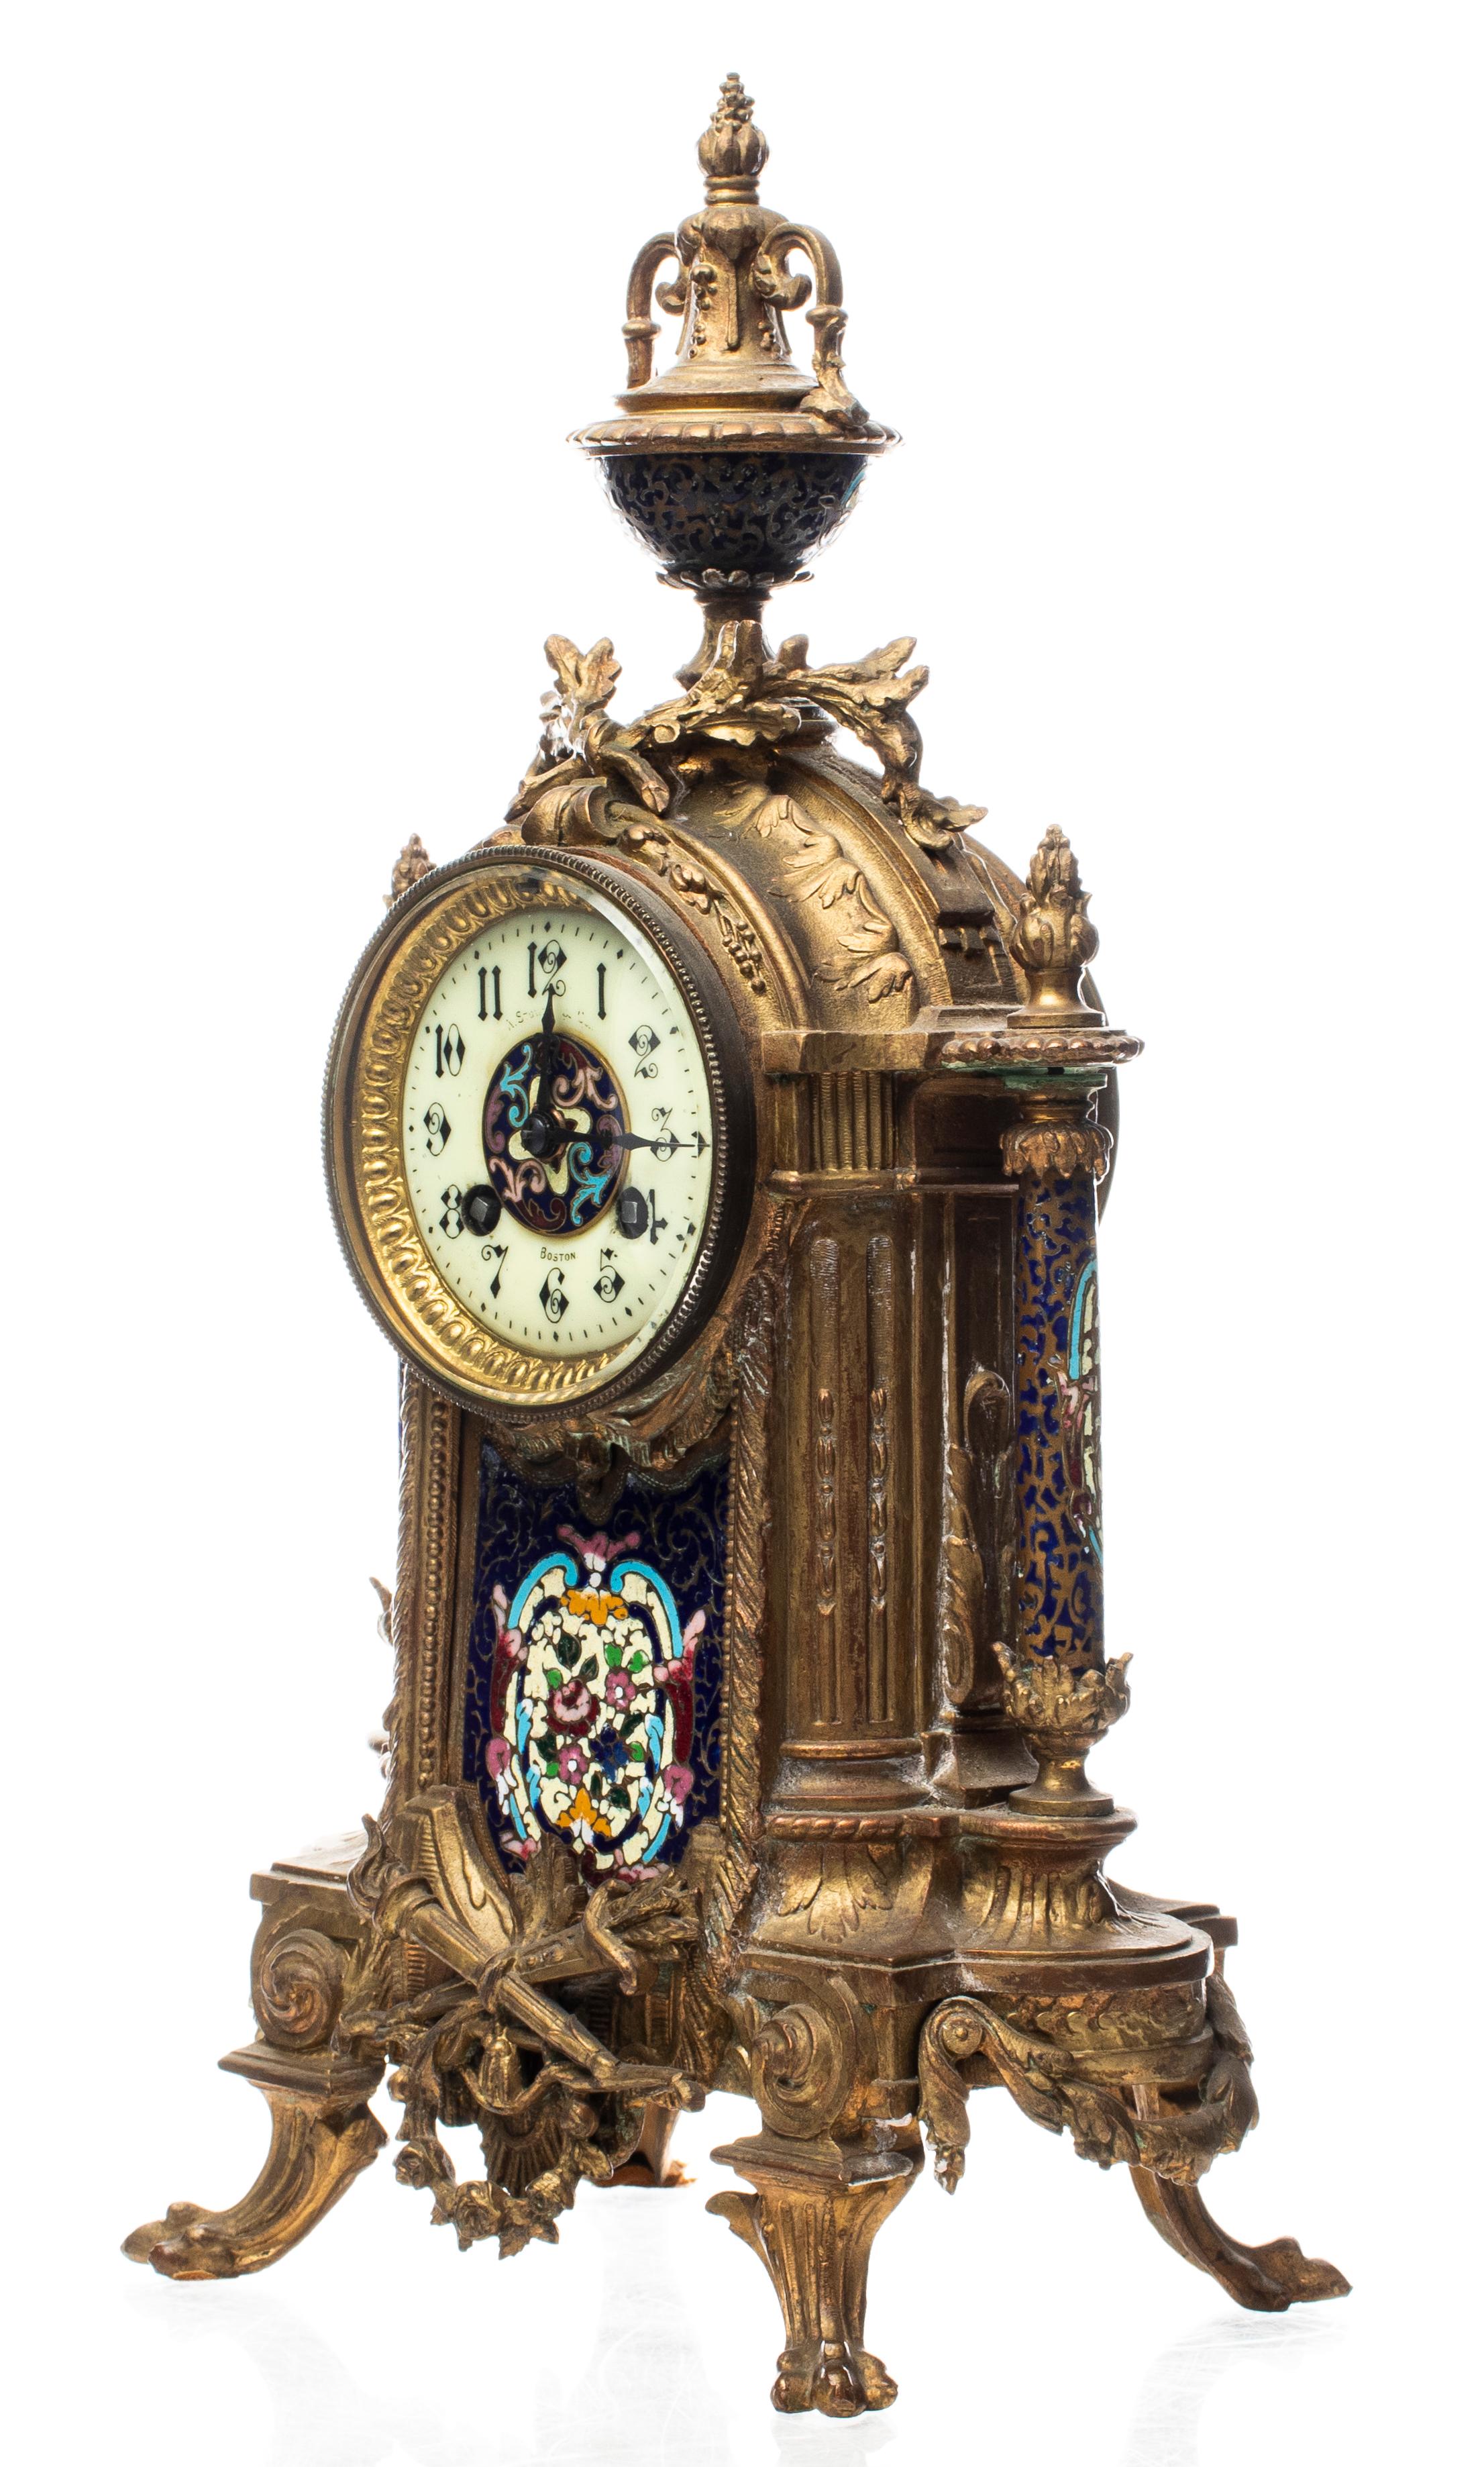 Rococo Revival gilt bronze mantel clock with enamel columns and panels, marked 